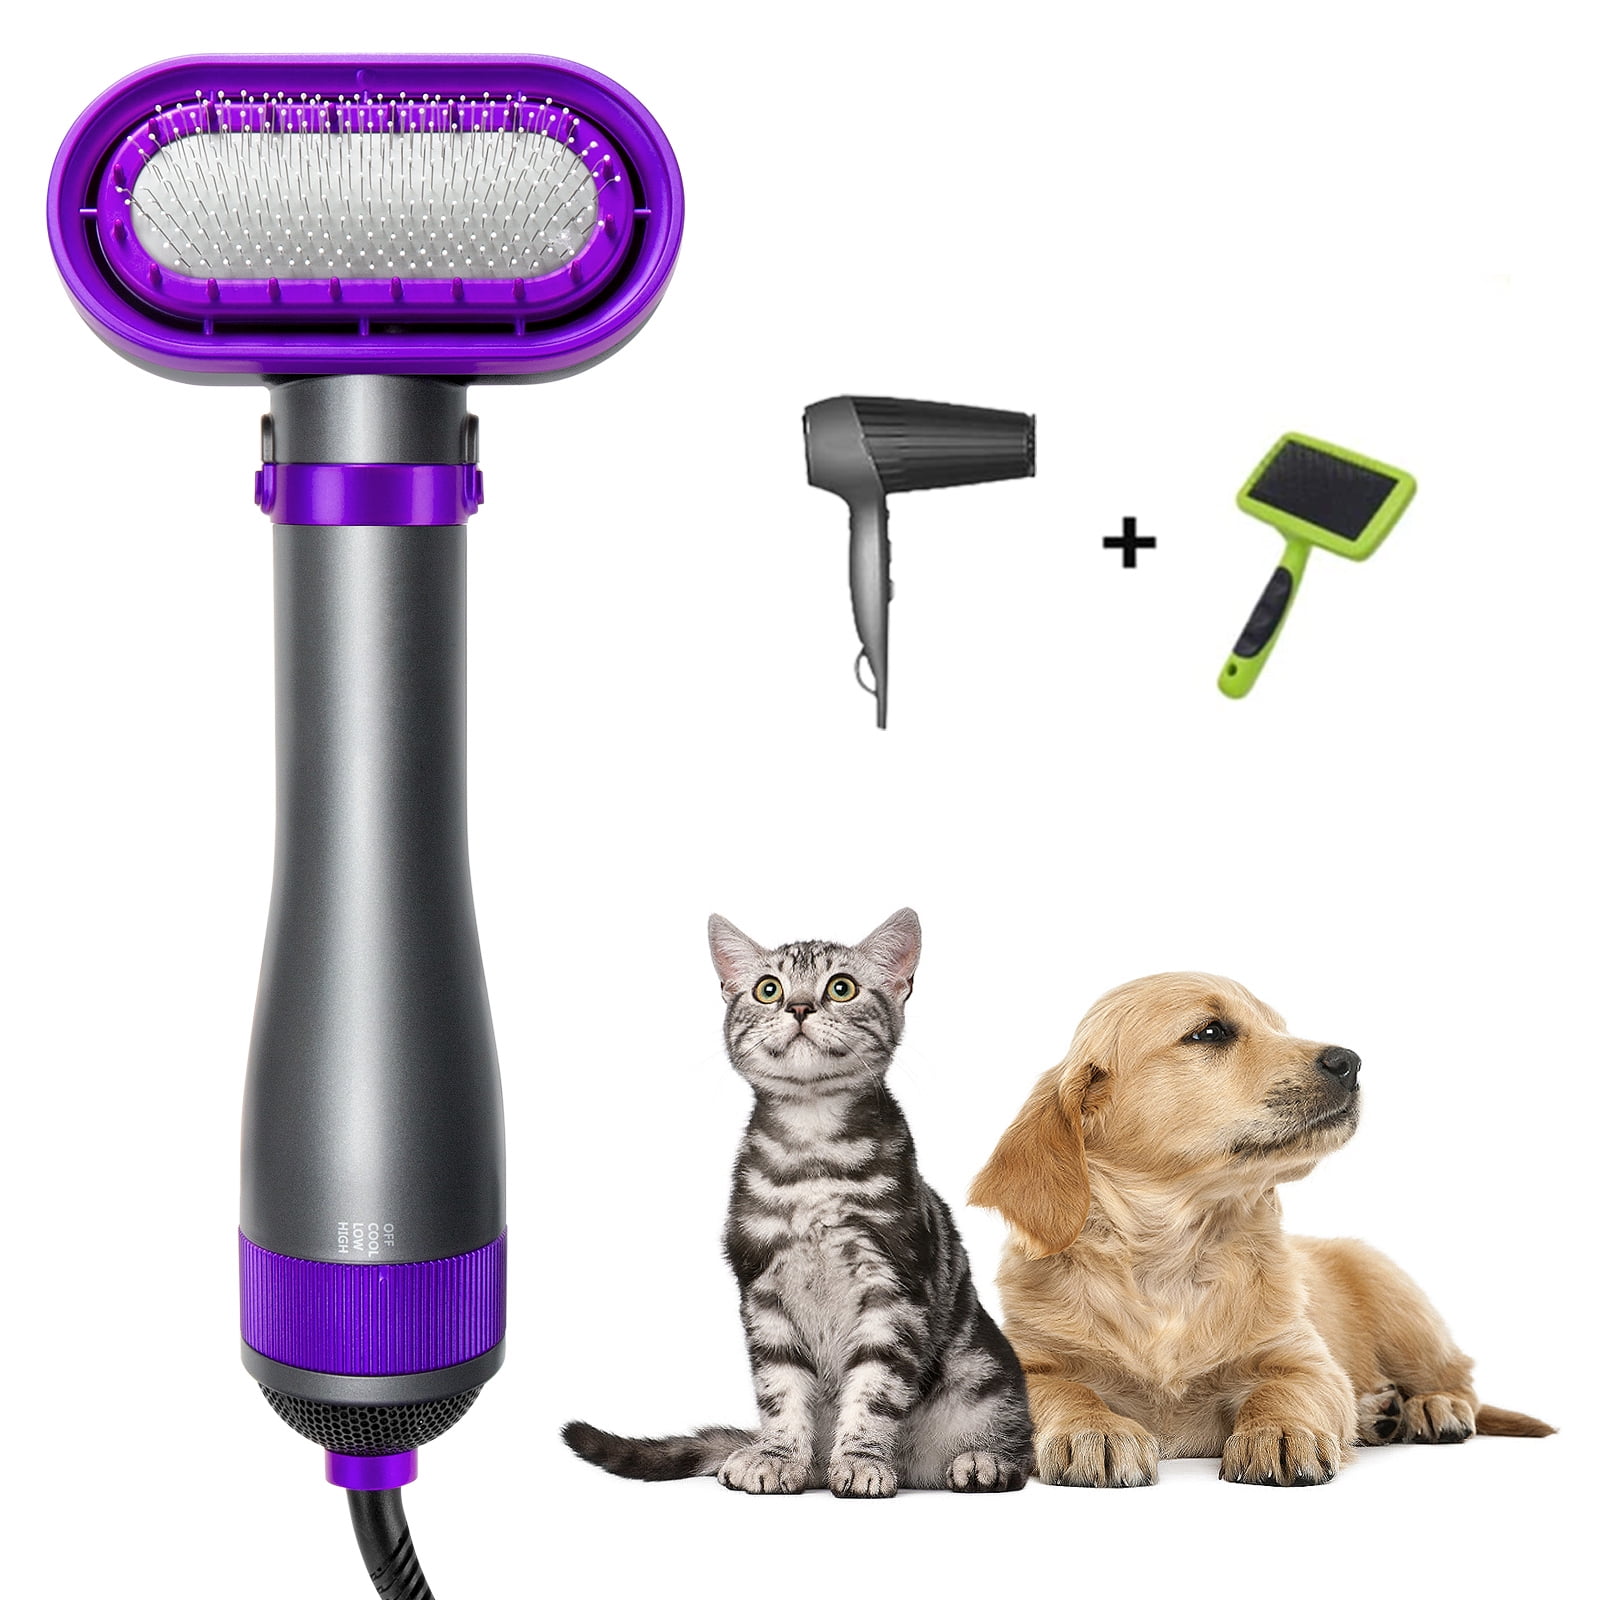 For all those wet whiskers and muddy paws – Doggy Dryer offers a